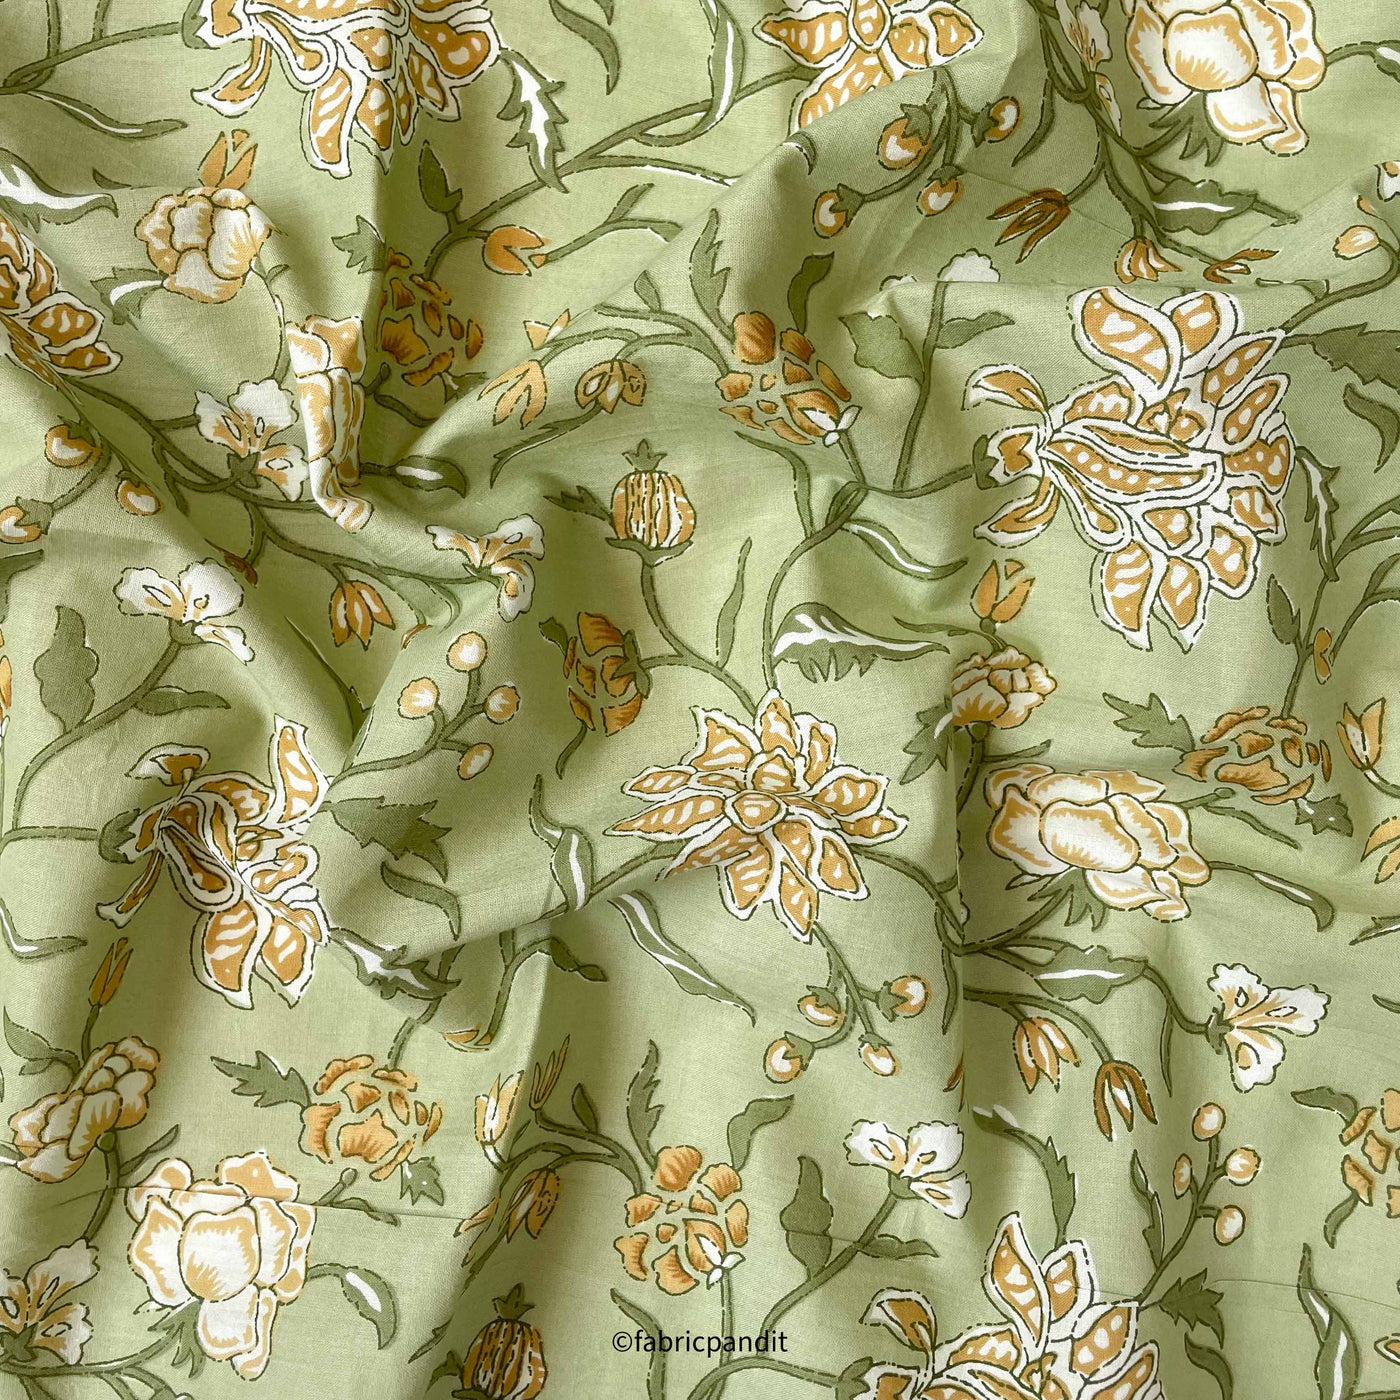 Fabric Pandit Fabric Pastel Green & Yellow Vintage Floral Vines Hand Block Printed Pure Cotton Fabric (Width 42 inches)